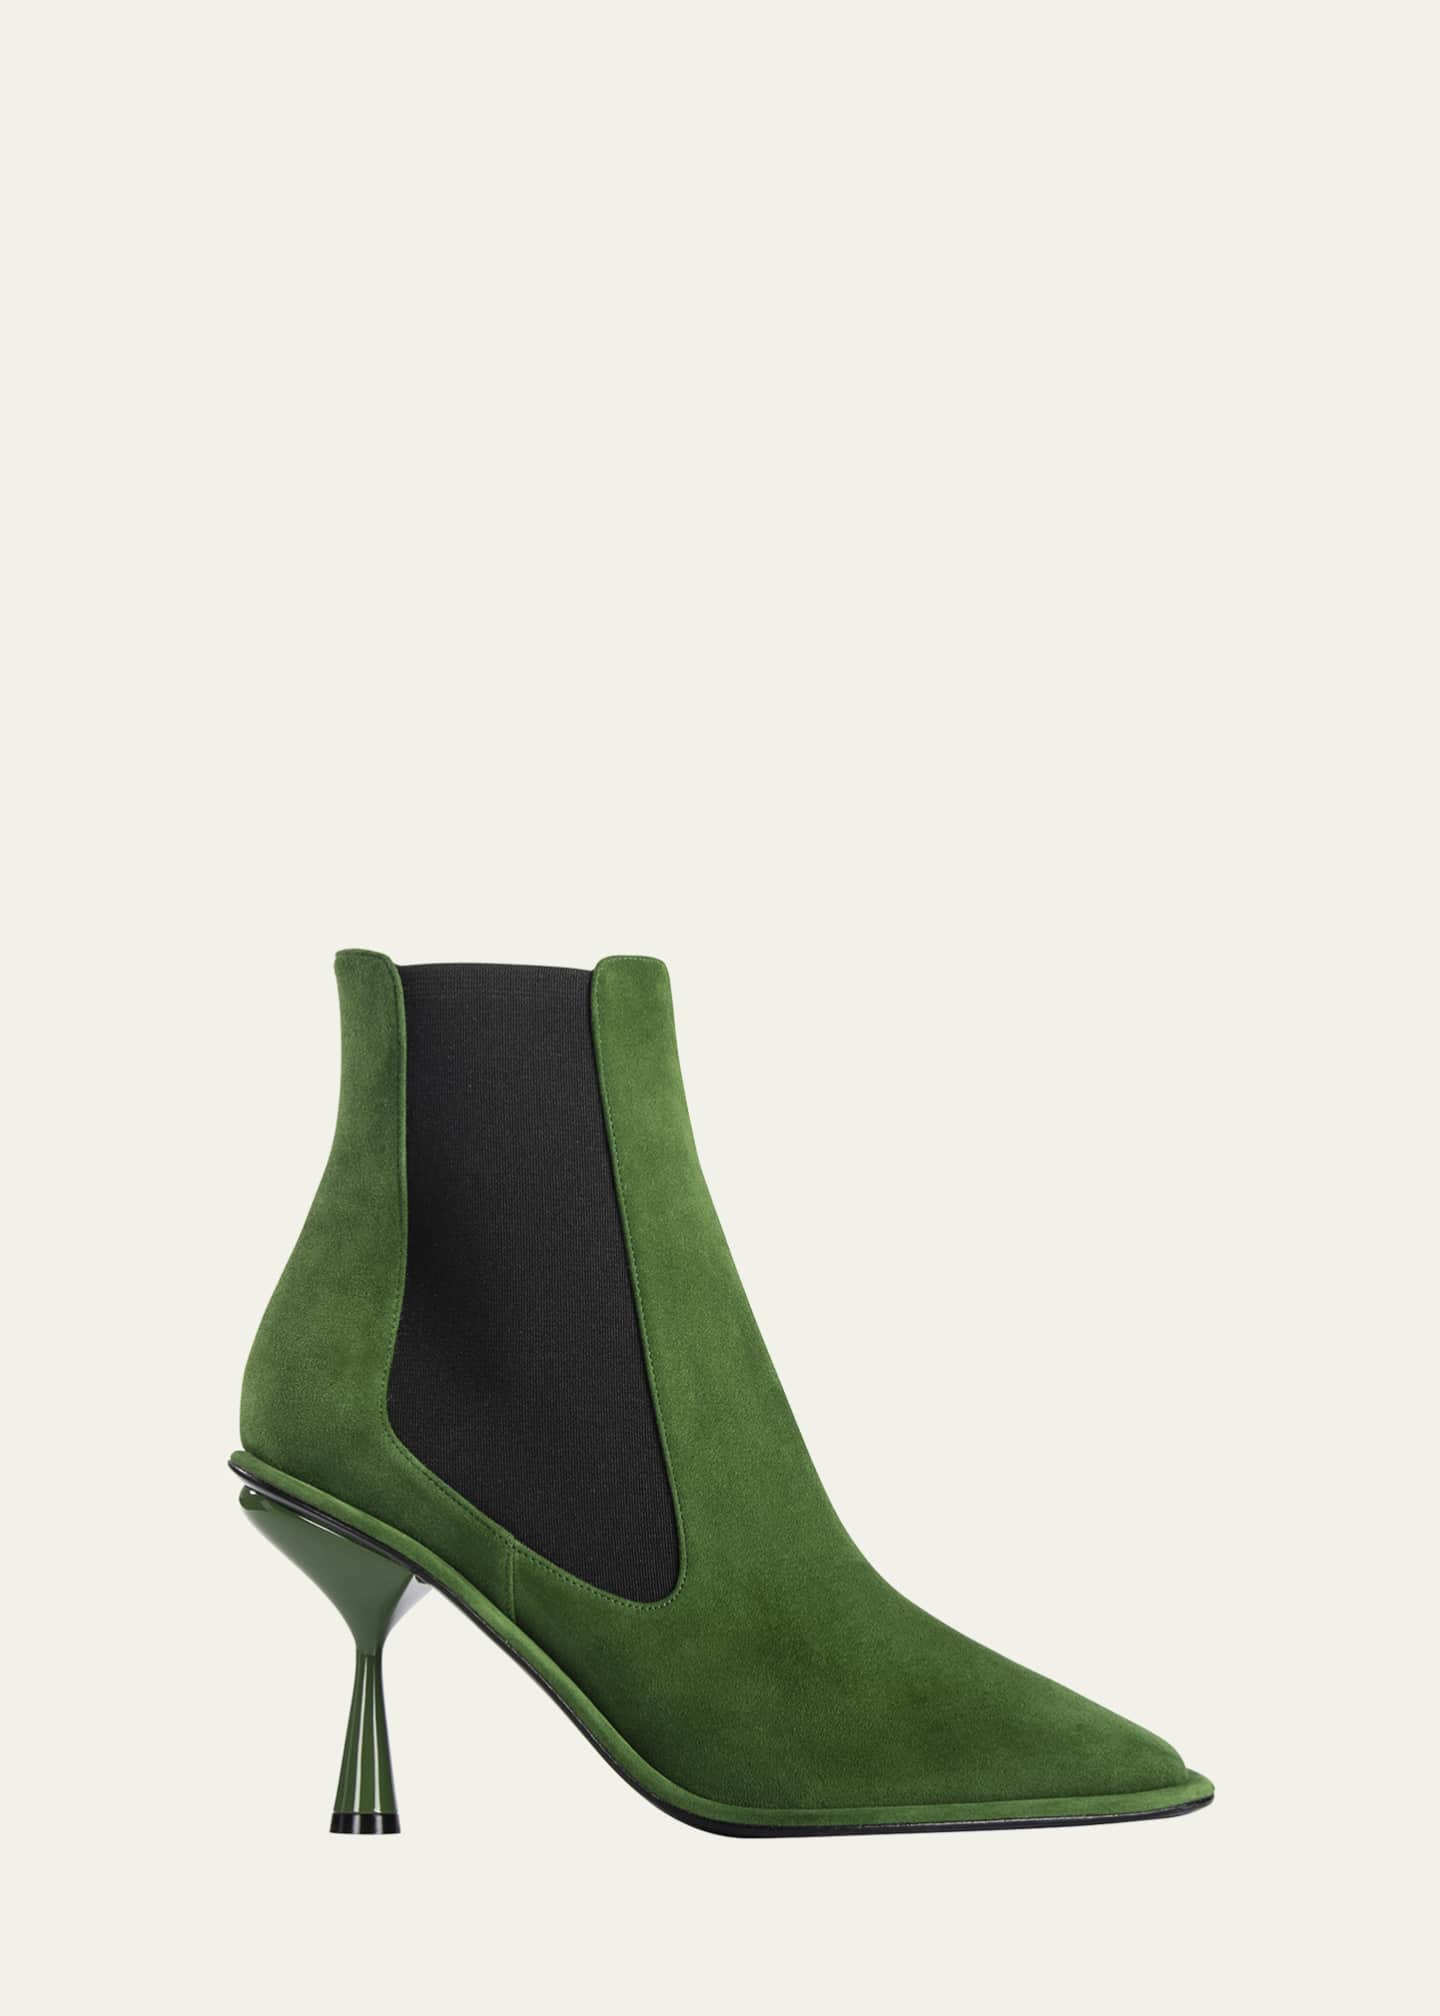 Pierre Hardy Lave Suede Ankle Boots - Bergdorf Goodman